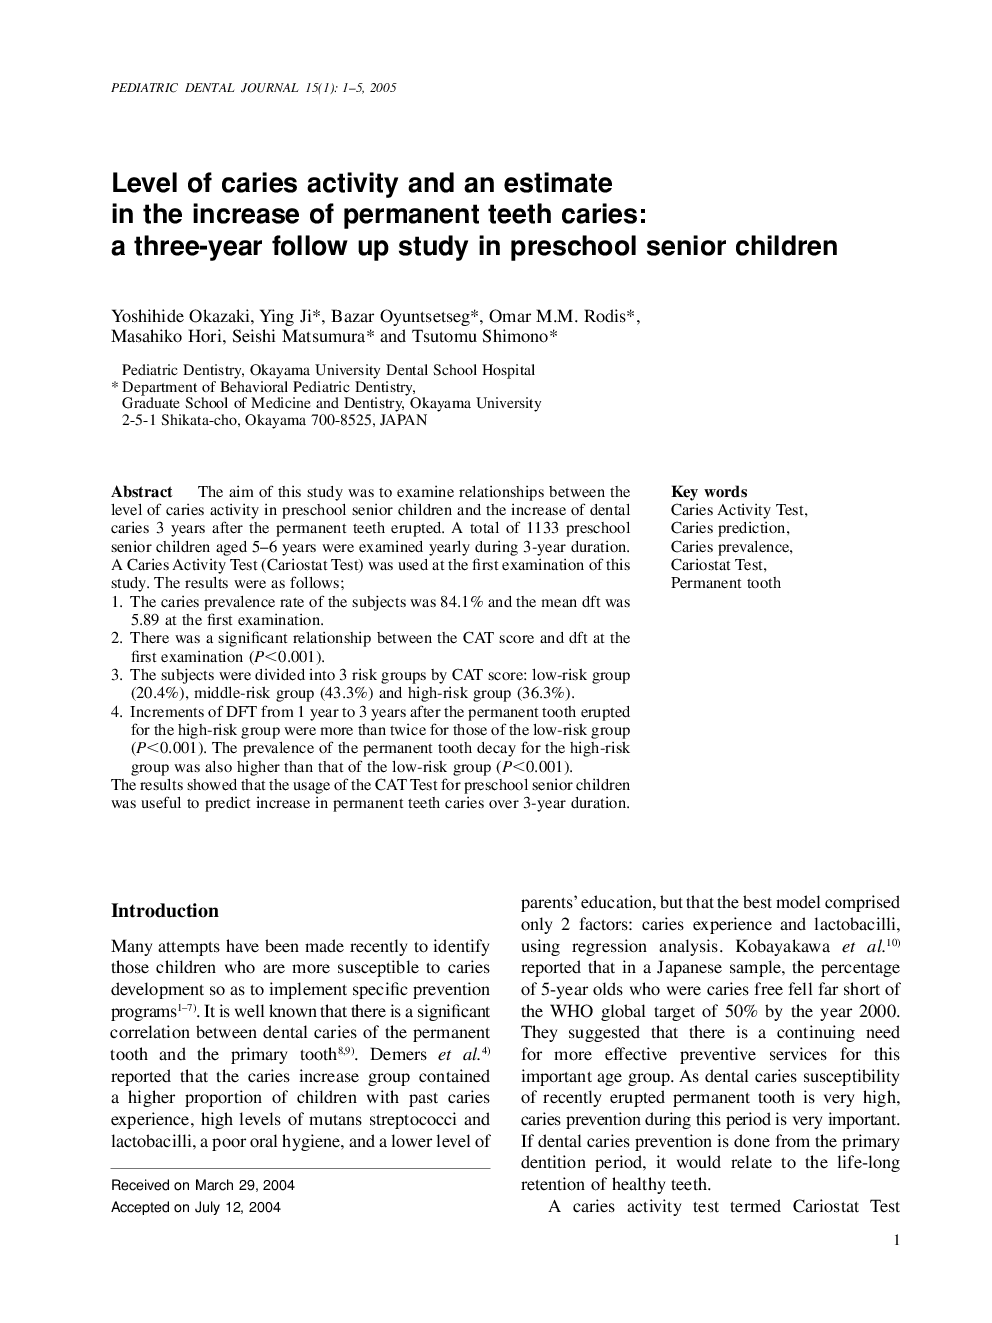 Level of caries activity and an estimate in the increase of permanent teeth caries: a three-year follow up study in preschool senior children